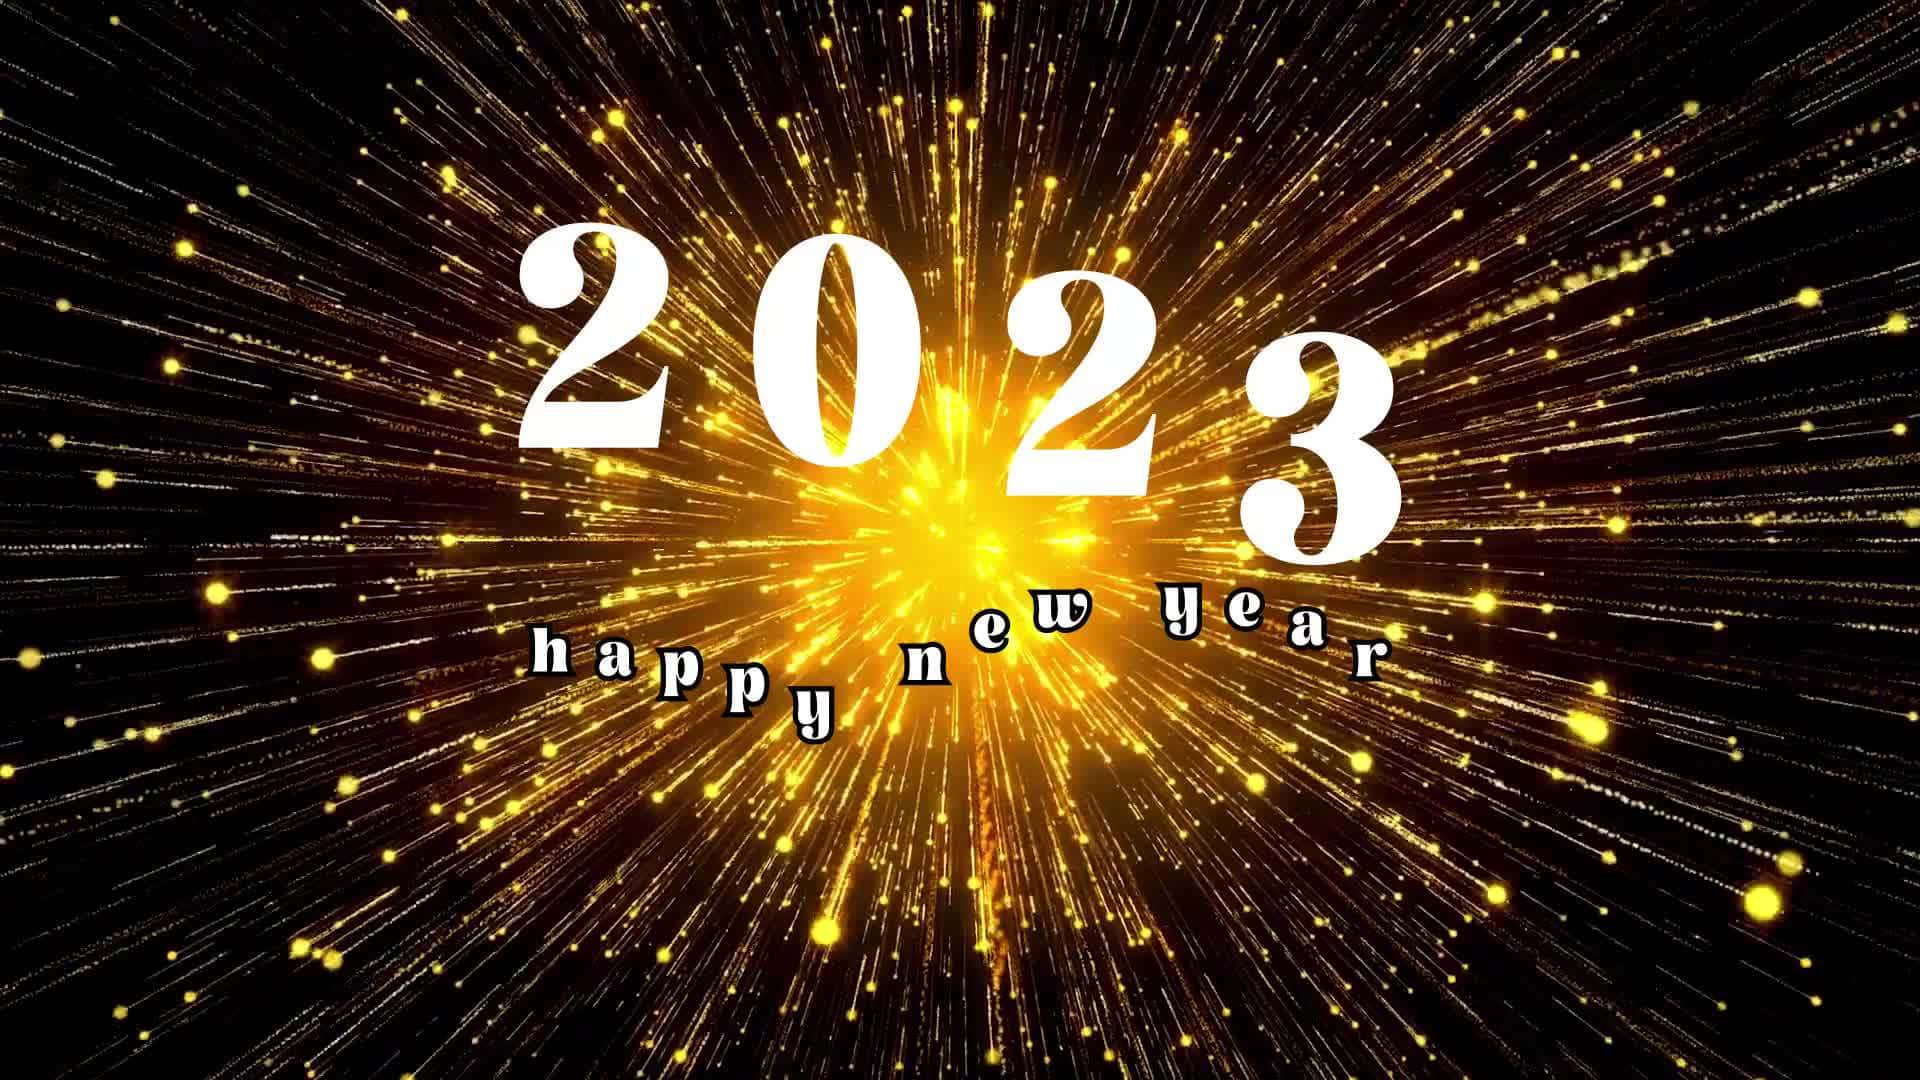 Say goodbye to 2020 and hello to the new year!